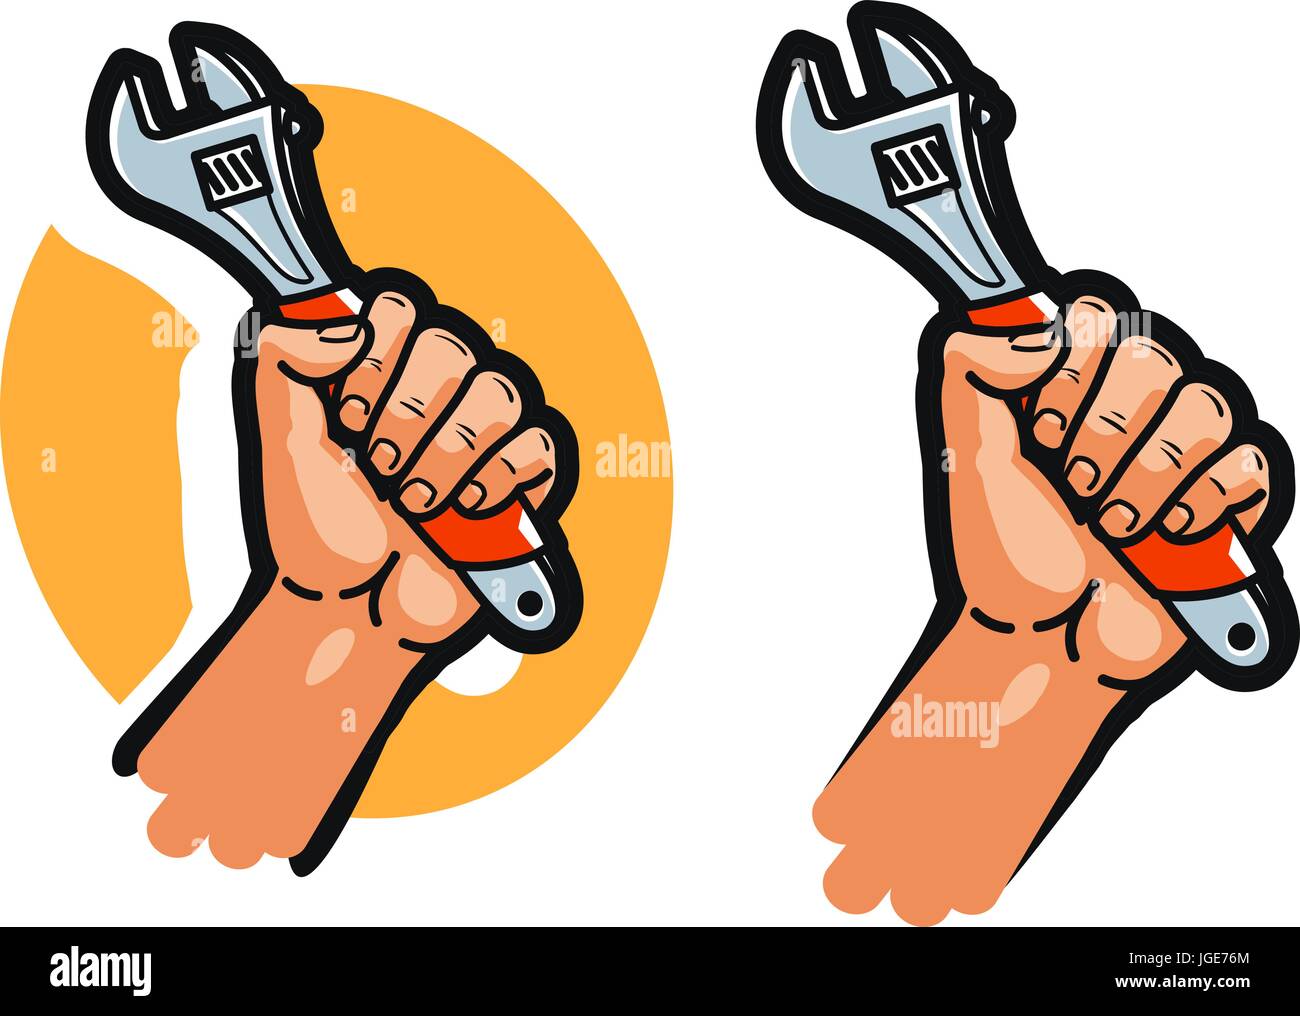 Wrench, tool or in hand. Repair, service, maintenance, support icon or logo. Cartoon vector illustration Stock Vector